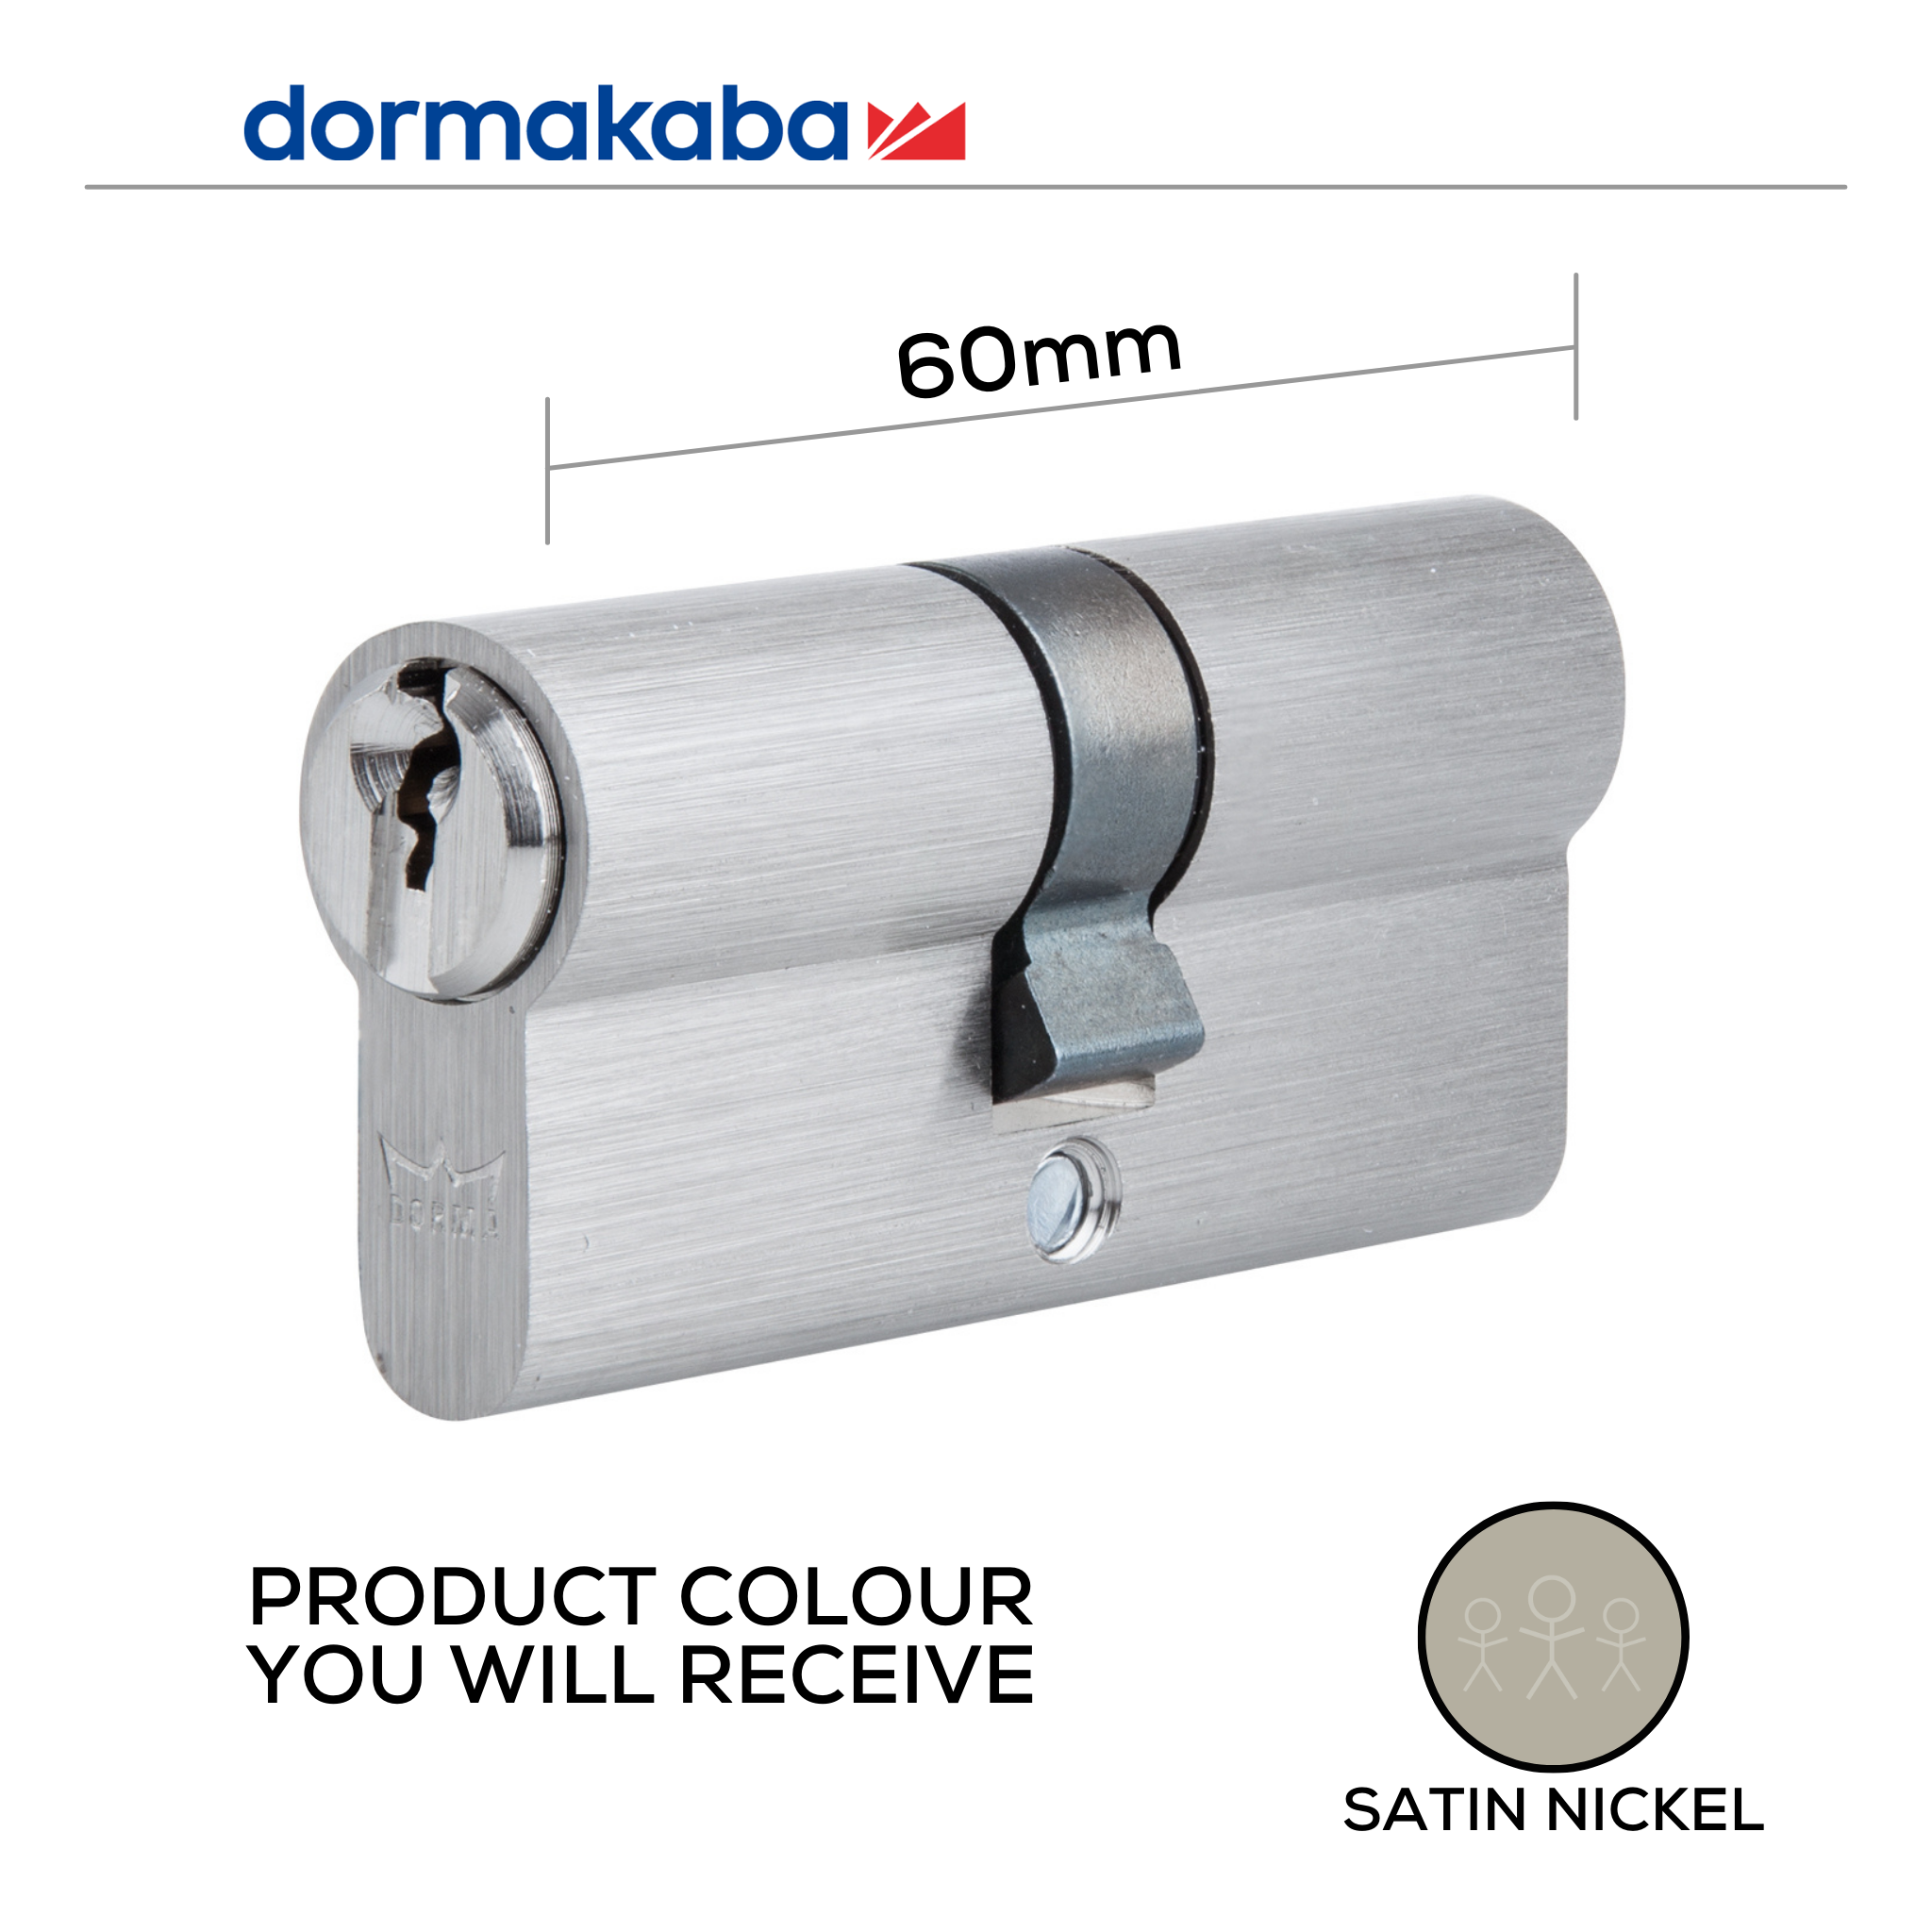 DDC056001 KD, 60mm (l), Double, Cylinder, Key to Key, Keyed Different, 5 Pin, Satin Nickel, DORMAKABA